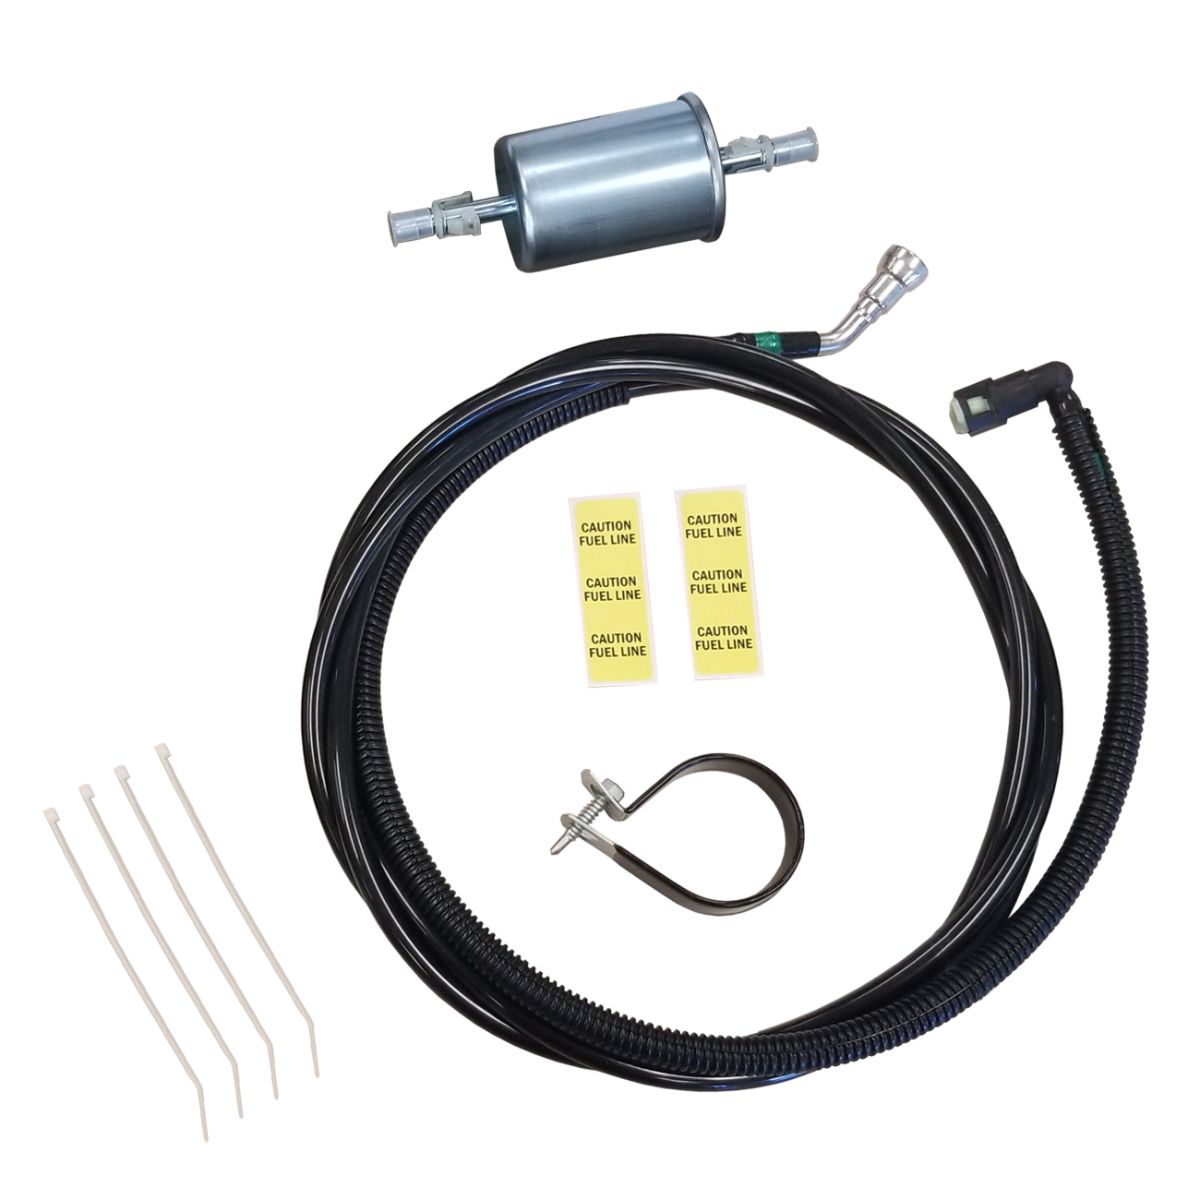 2000-05 Chevrolet Monte Carlo Impala 3.8L Only Nylon Fuel Supply Line Kit Filter to Engine at Inline Tube